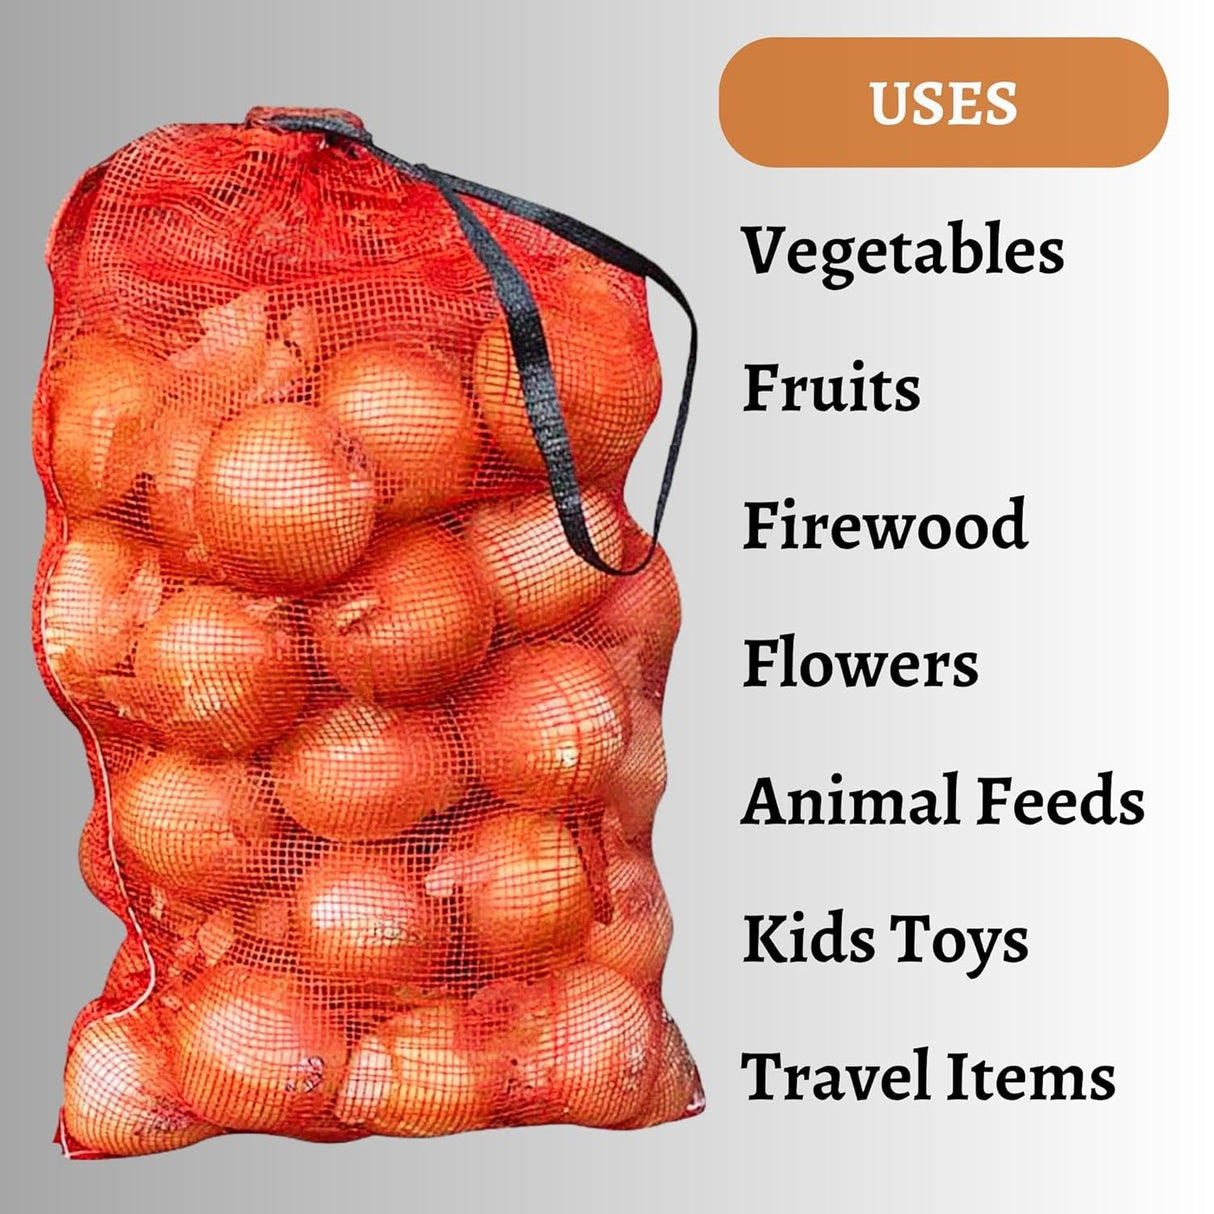 SINGHAL Mesh Onion Produce Bags with Drawstring | 20 Inch x 31.50 Inch Bags | Reusable Breathable Leno PP Fabric | Orange Color| Great for Packaging Produce, Vegetables and Fruit | Combo Pack of 10